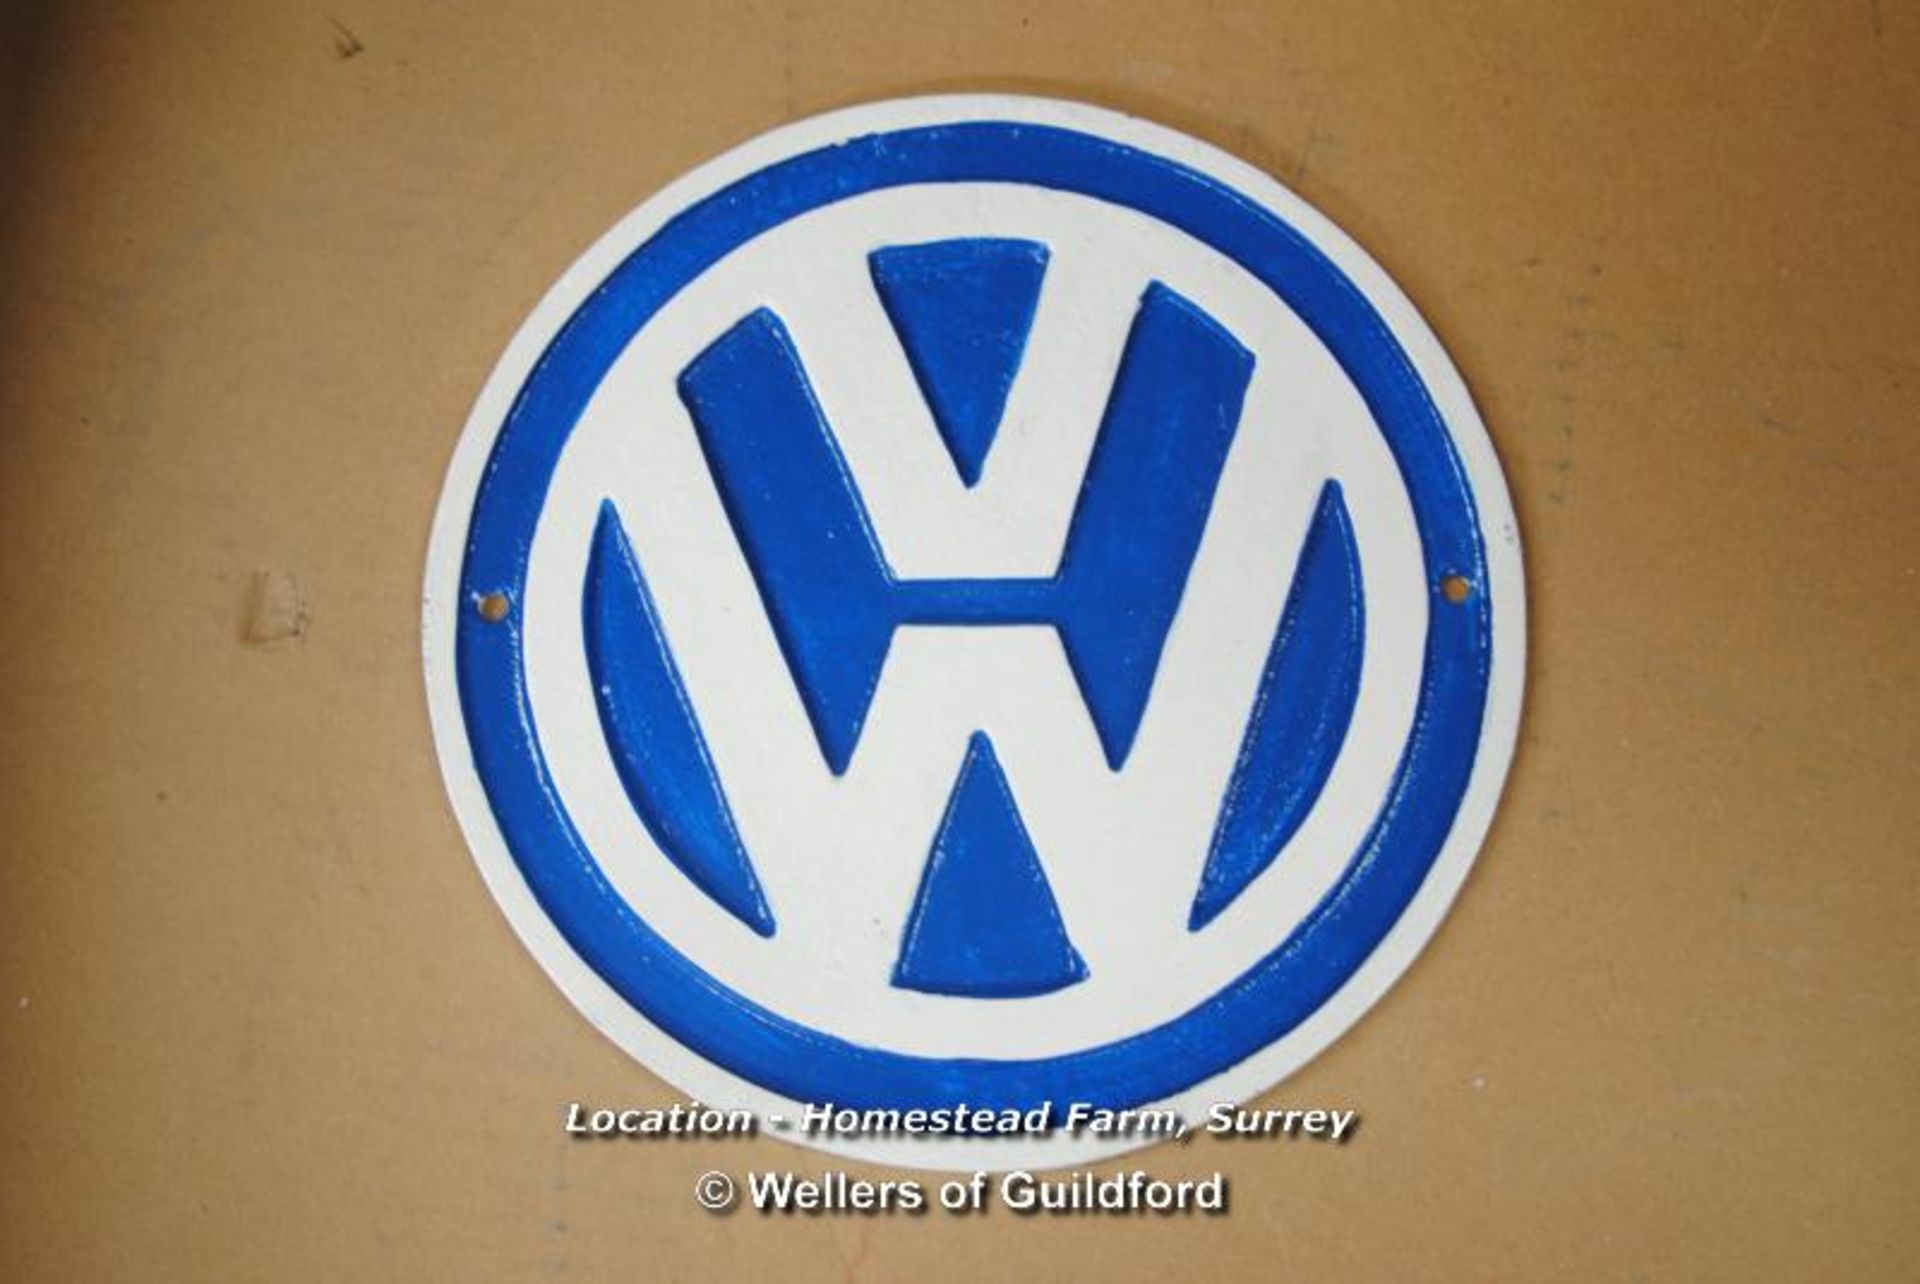 *CAST VW PLAQUE [LOCATION: HOMESTEAD FARM - CALL THE OFFICE TO BOOK A COLLECTION APPOINTMENT /